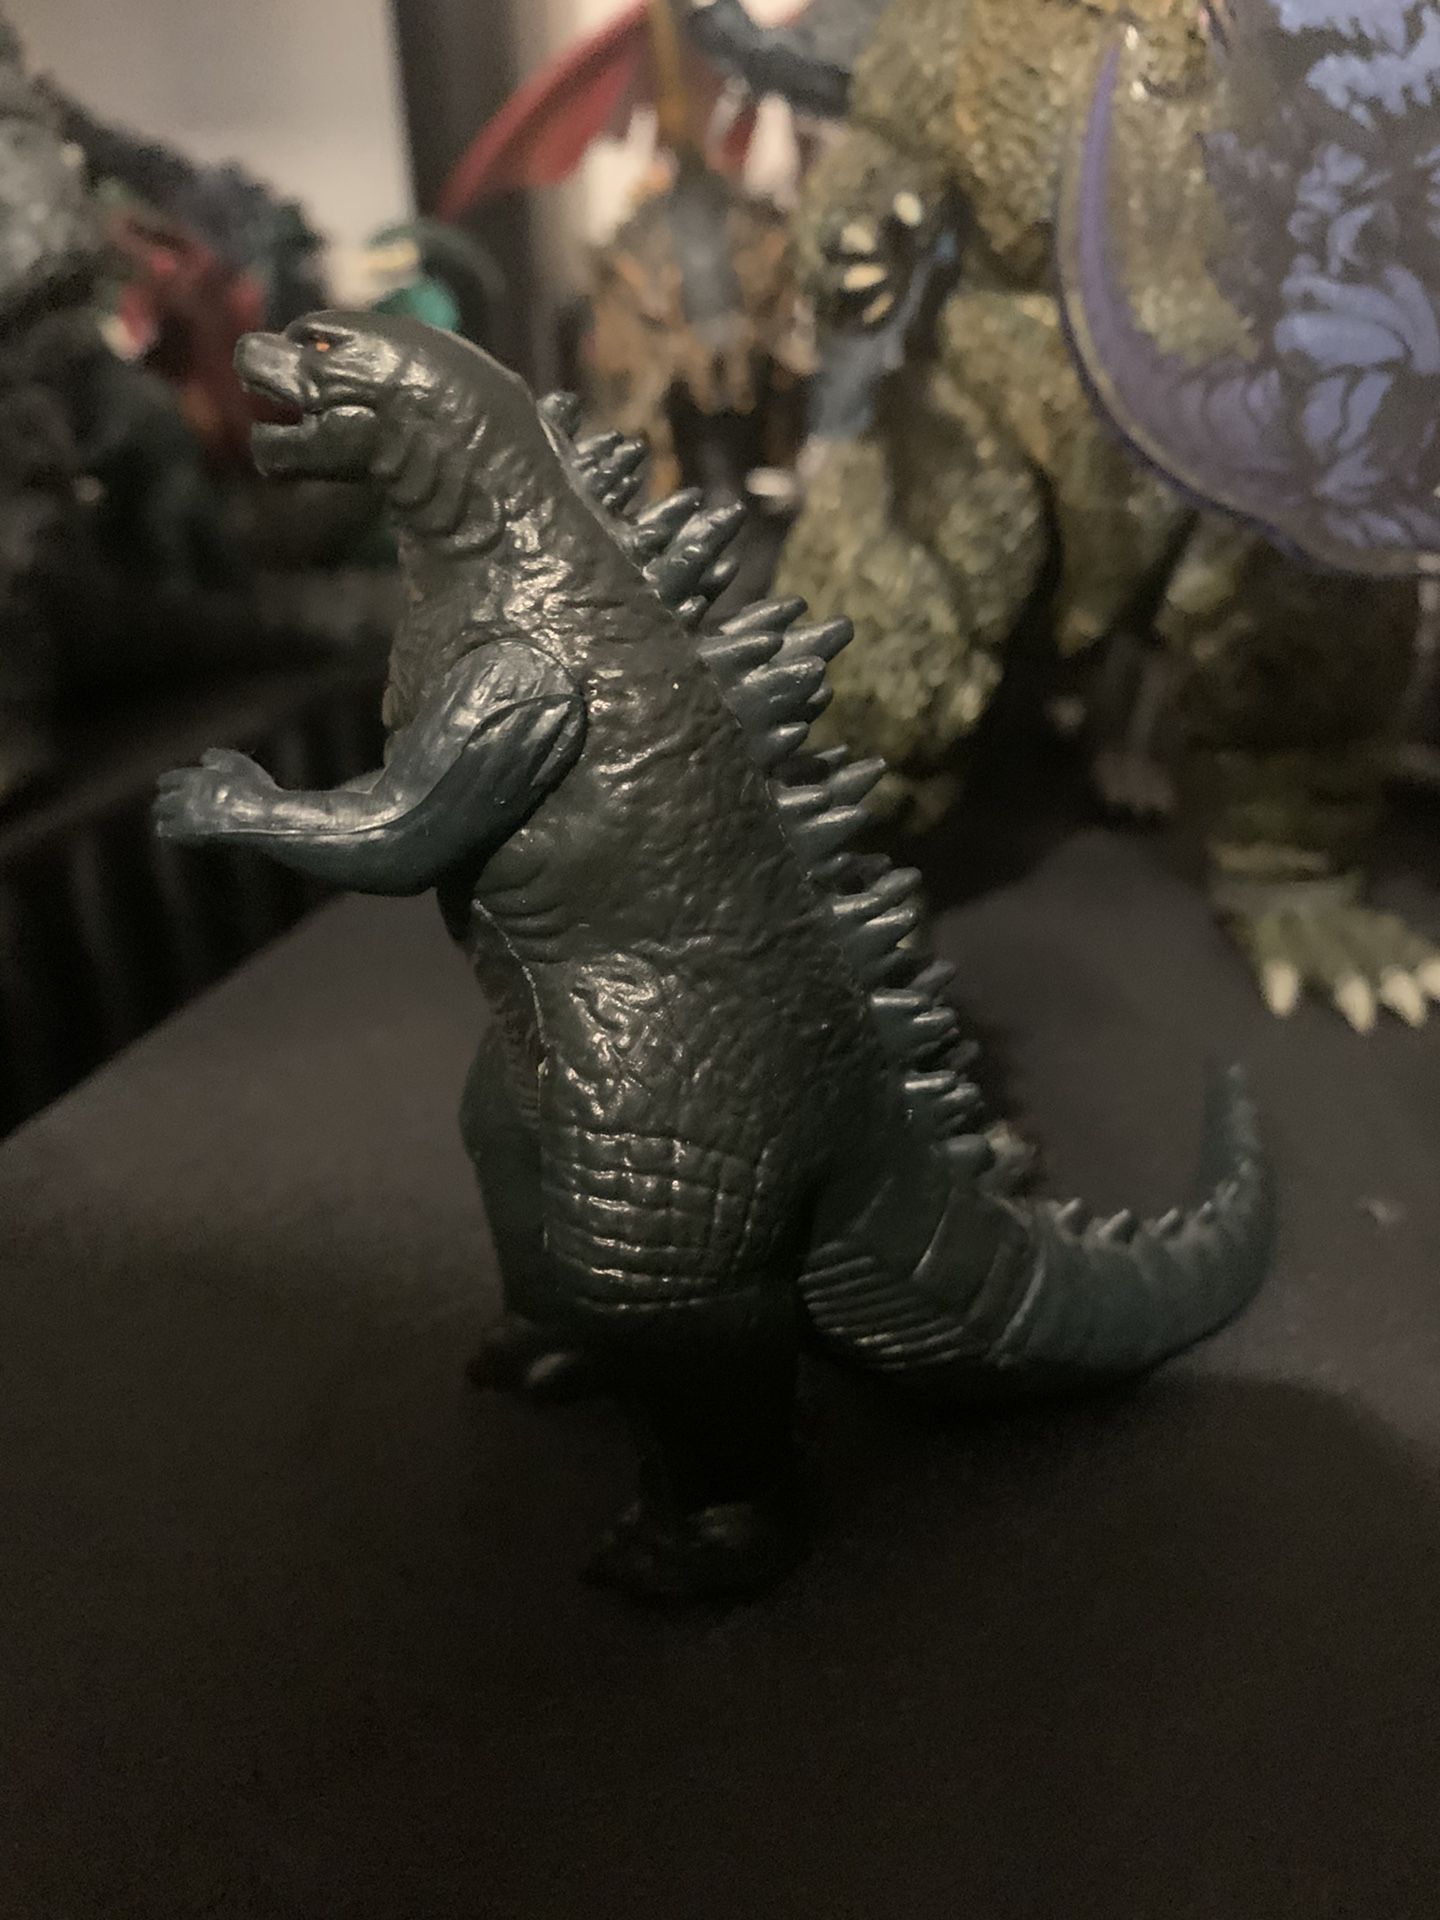 RP Minis Miniature Editions Godzilla : With Light and Sound! Toy Sticker Book